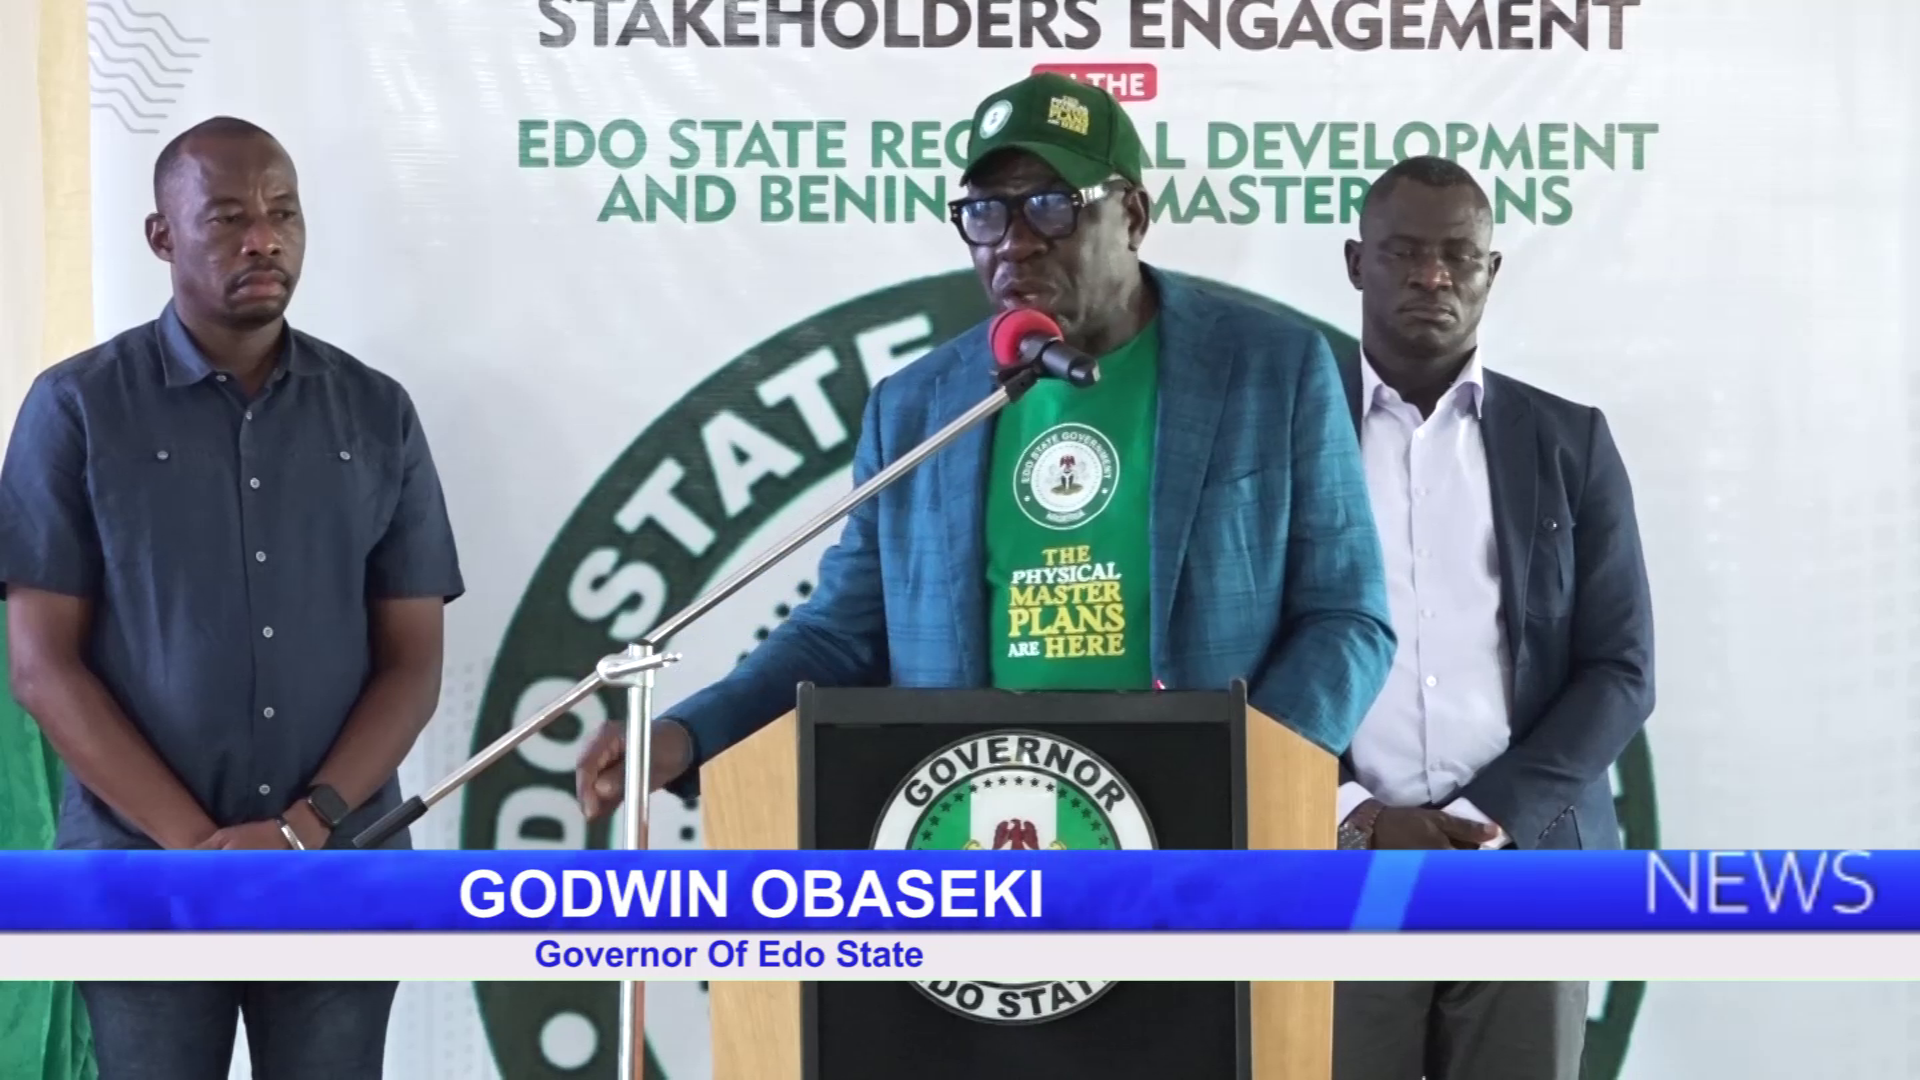 Governor Obaseki Engages Stakeholders In Edo Central On 30 Years Development Plan